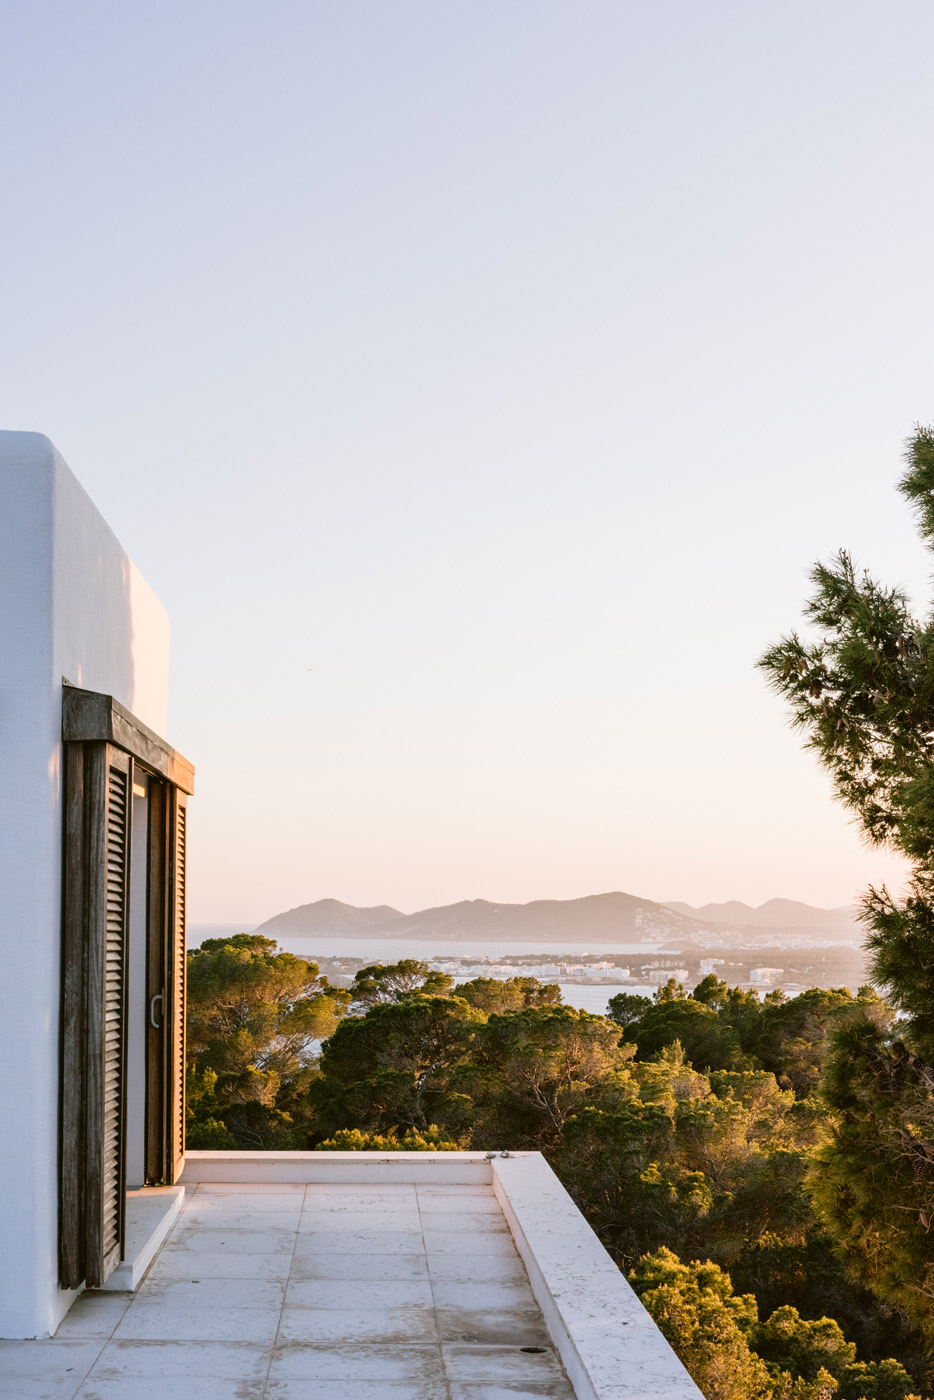 Expansive views from a peninsula estate in Ibiza